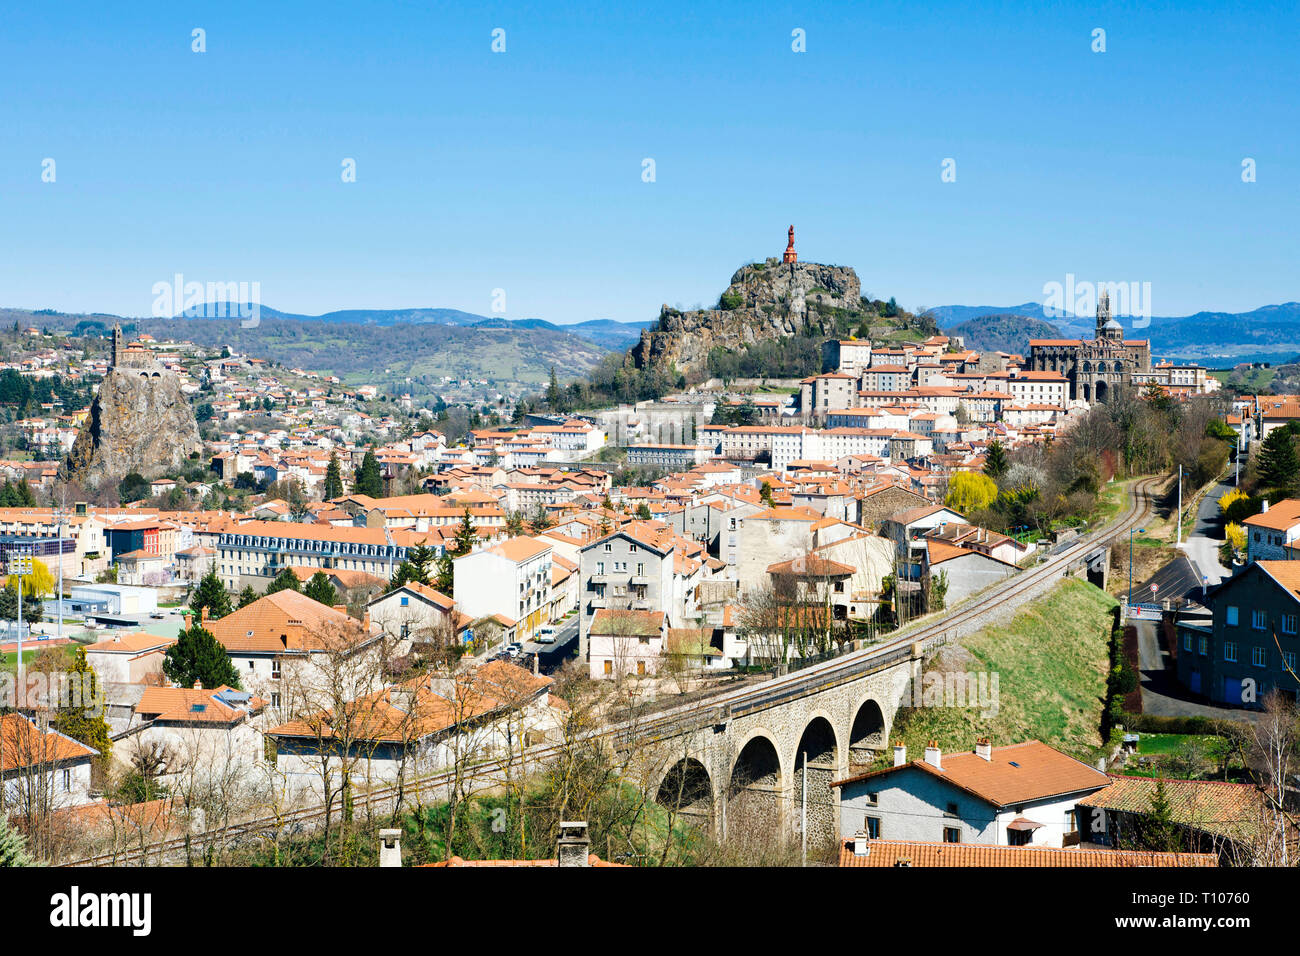 Le Puy-en-Velay (south-central France): Overview with the railway line ...